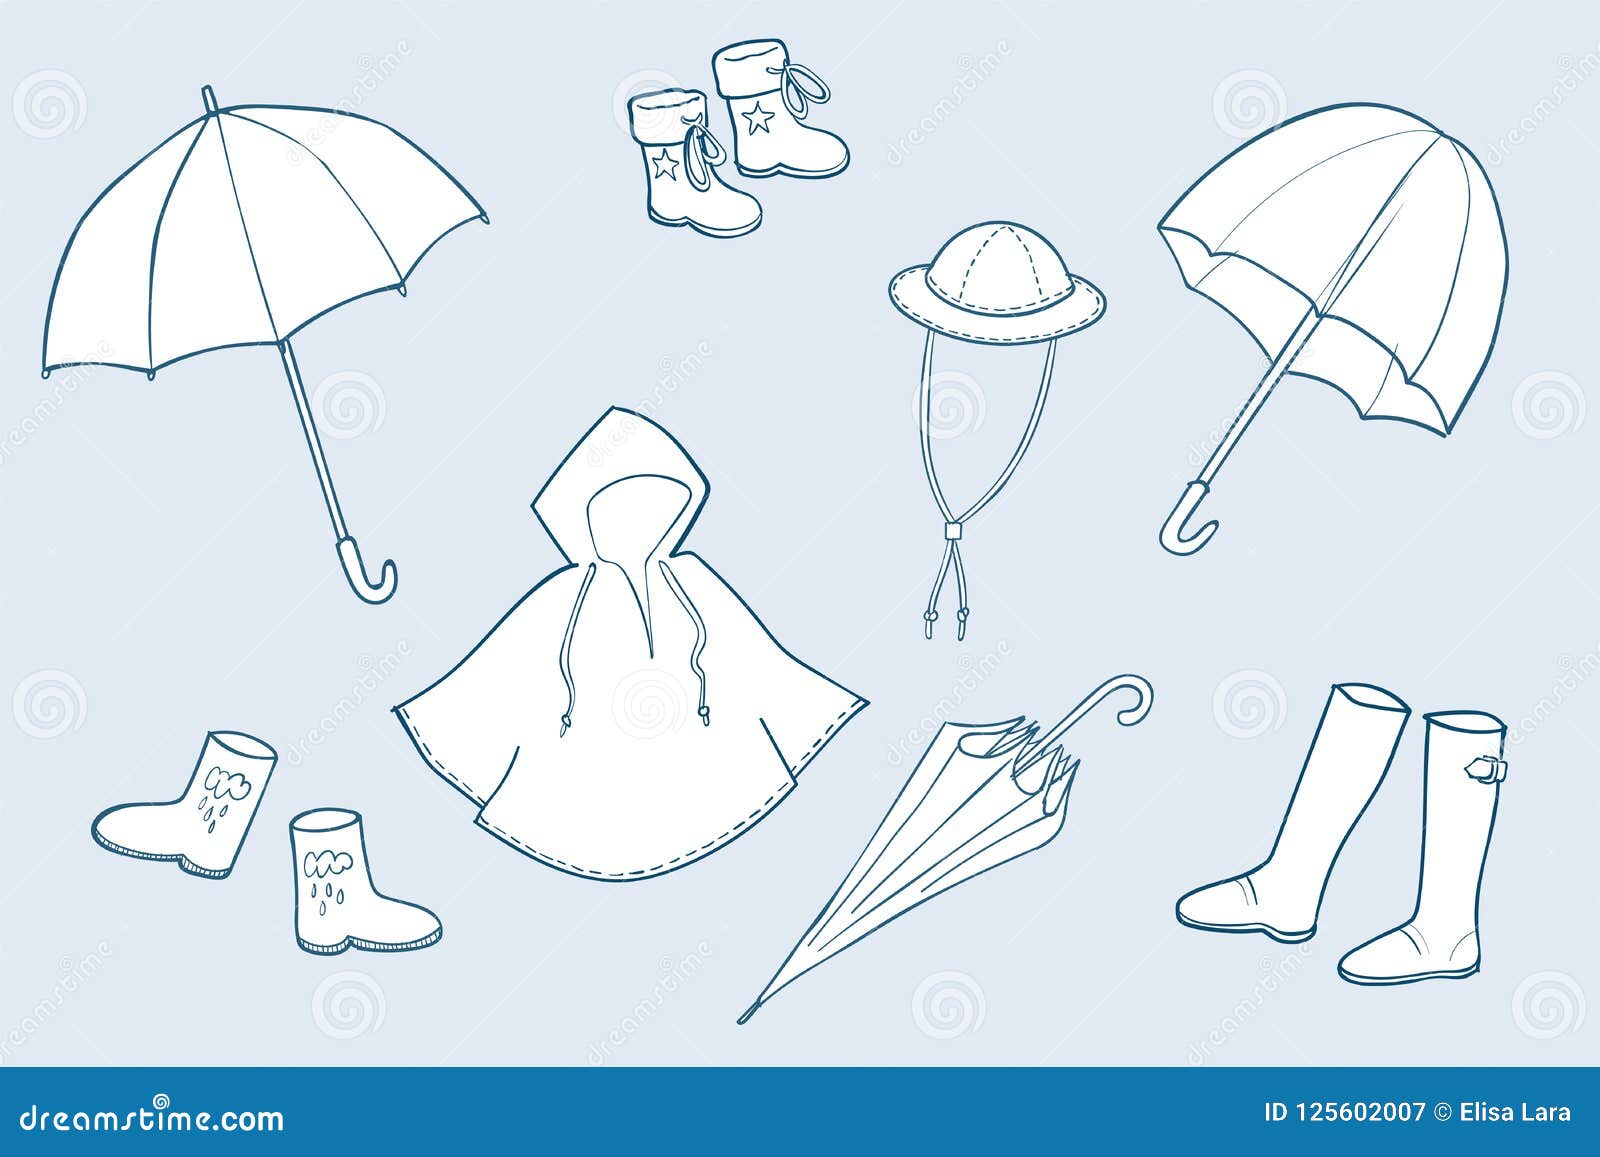 Blue Rainy Weather Clothes Vector Sketch Illustrations Stock ...